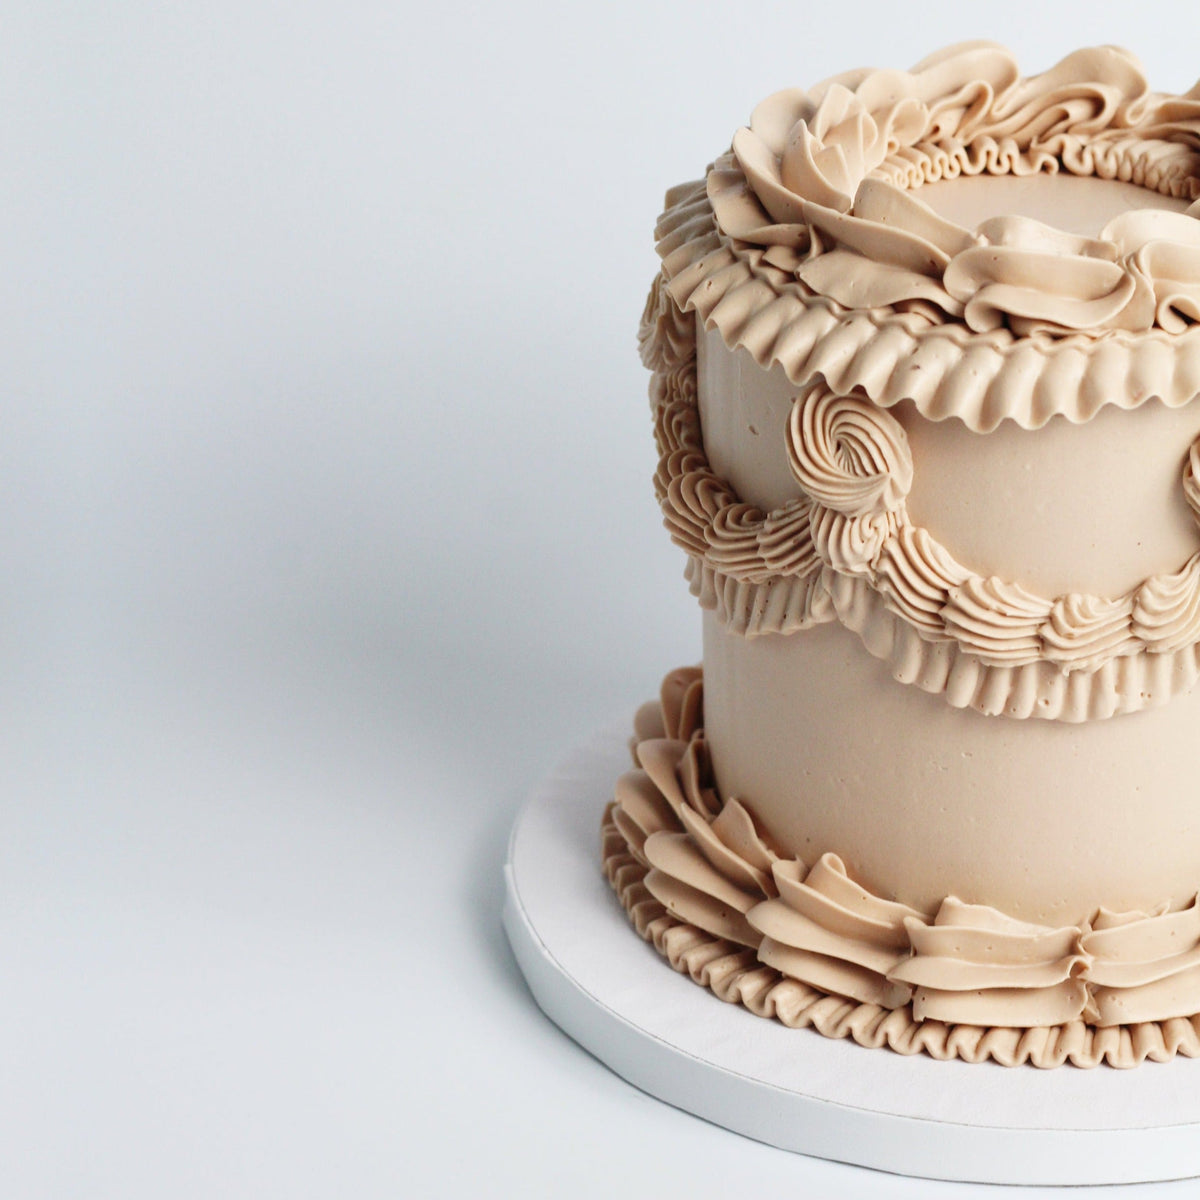 Poppy Vintage Cake is all about gorgeous buttercream piping!